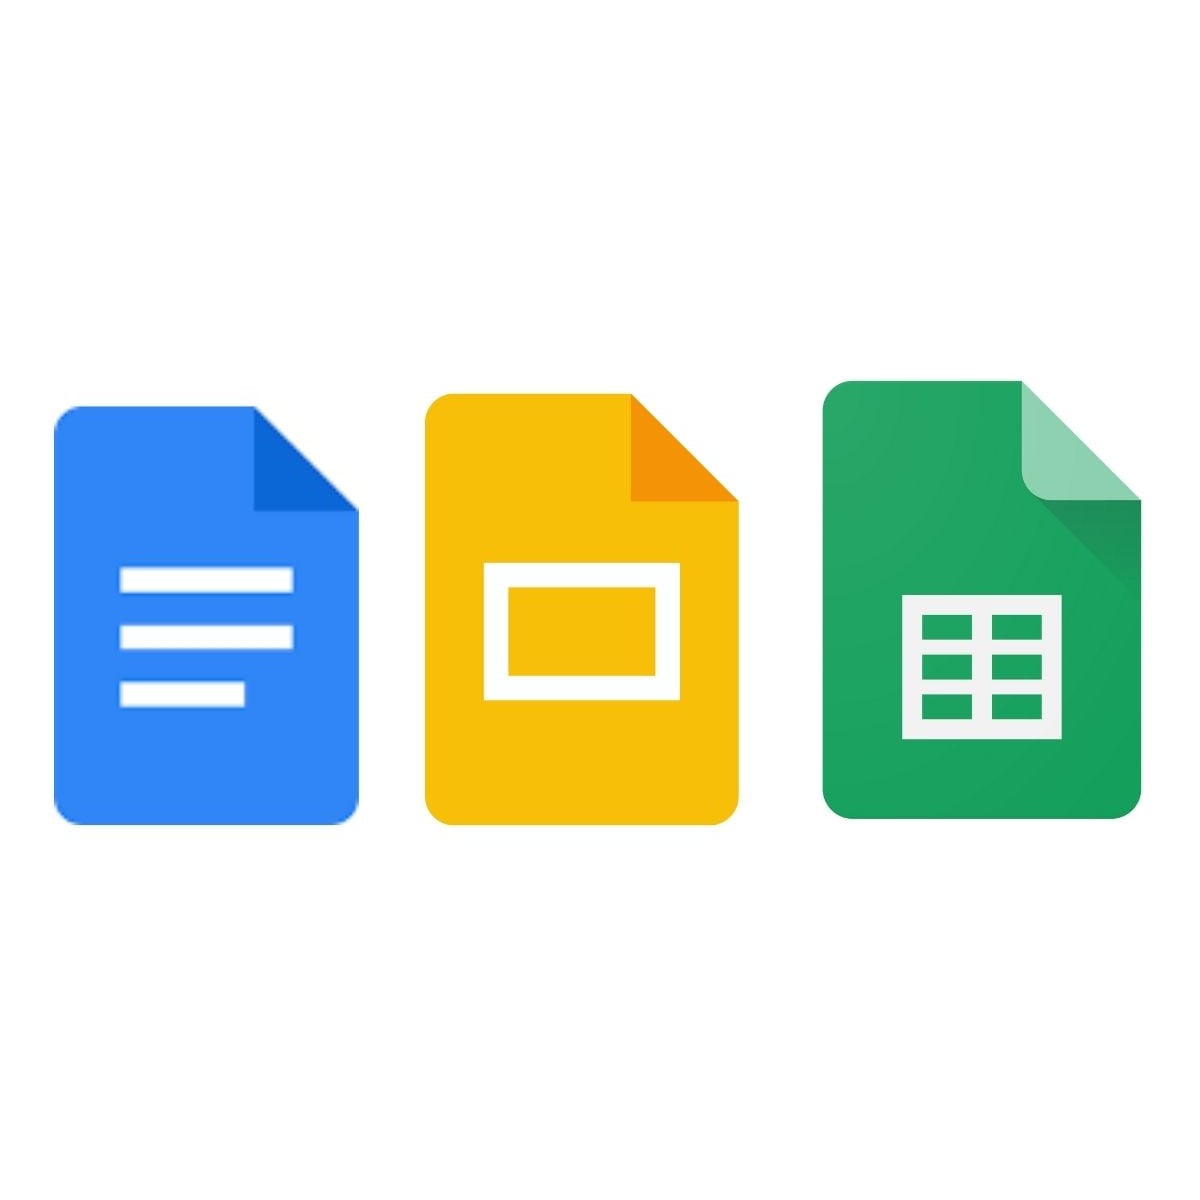 Google Docs, Sheets, And Slides Get Android 12's Splash Screen Launch  Animation